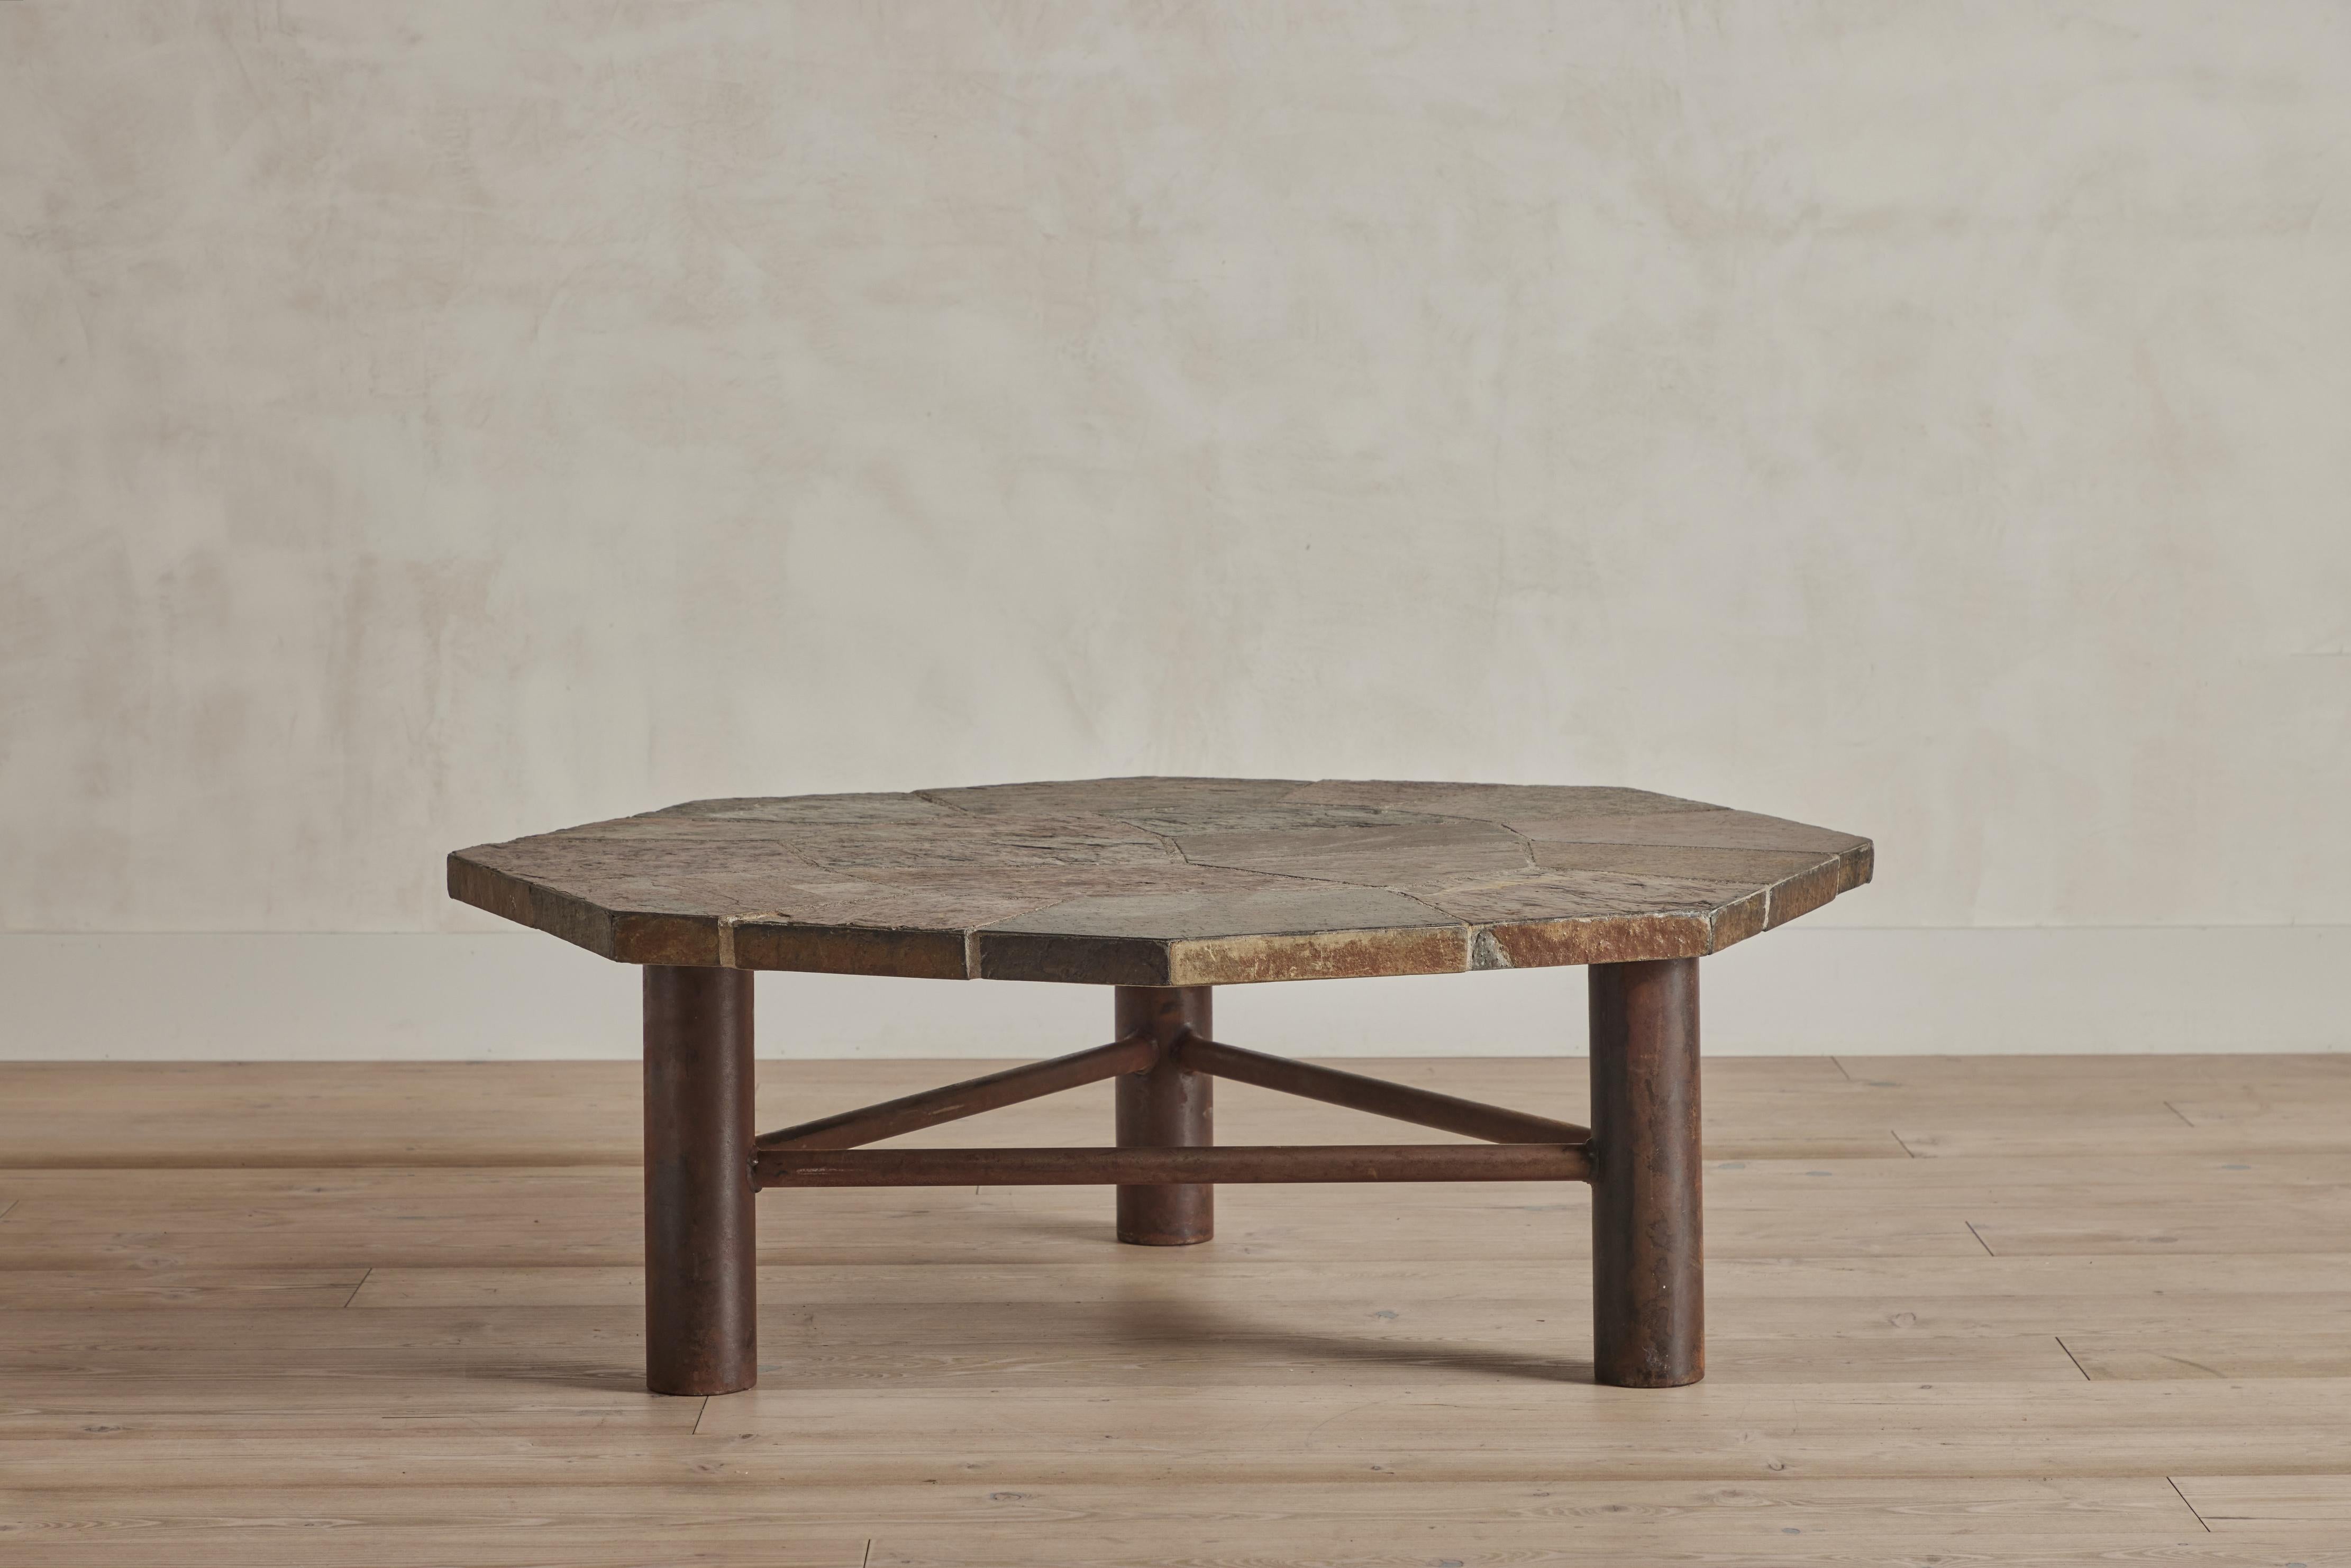 Slate coffee table with an octagonal shaped top and wood base. Scandinavia circa 1970. Wear consistent with age and use.